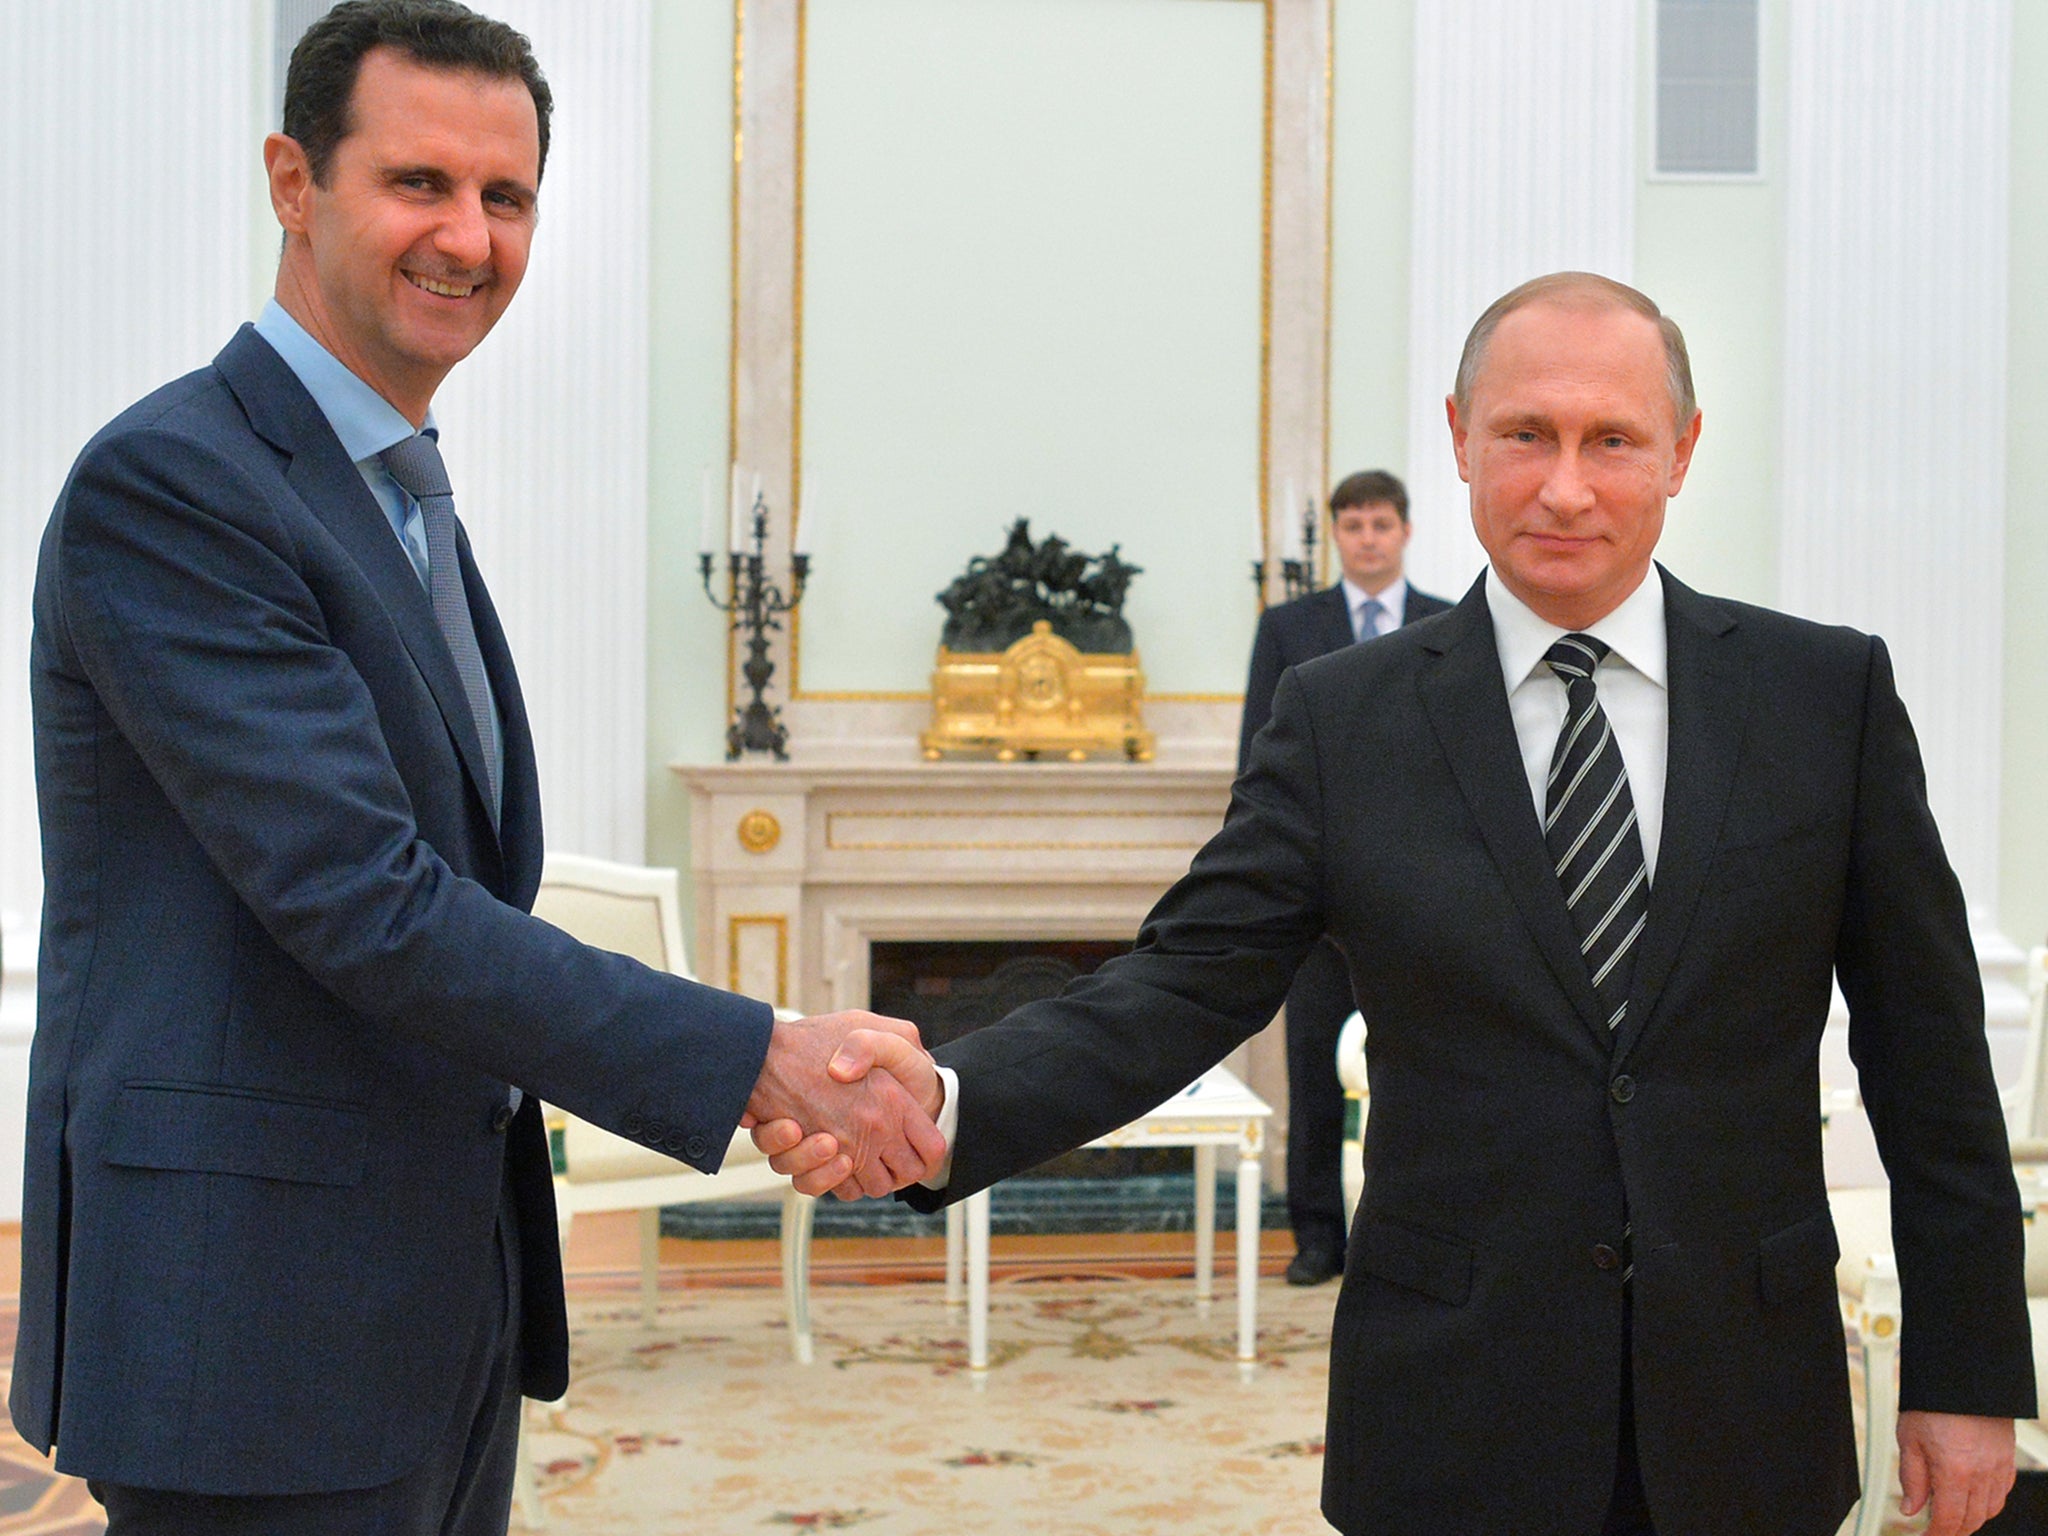 Russian President Vladimir Putin shakes hand with Syrian President Bashar Assad in the Kremlin in Moscow, Russia